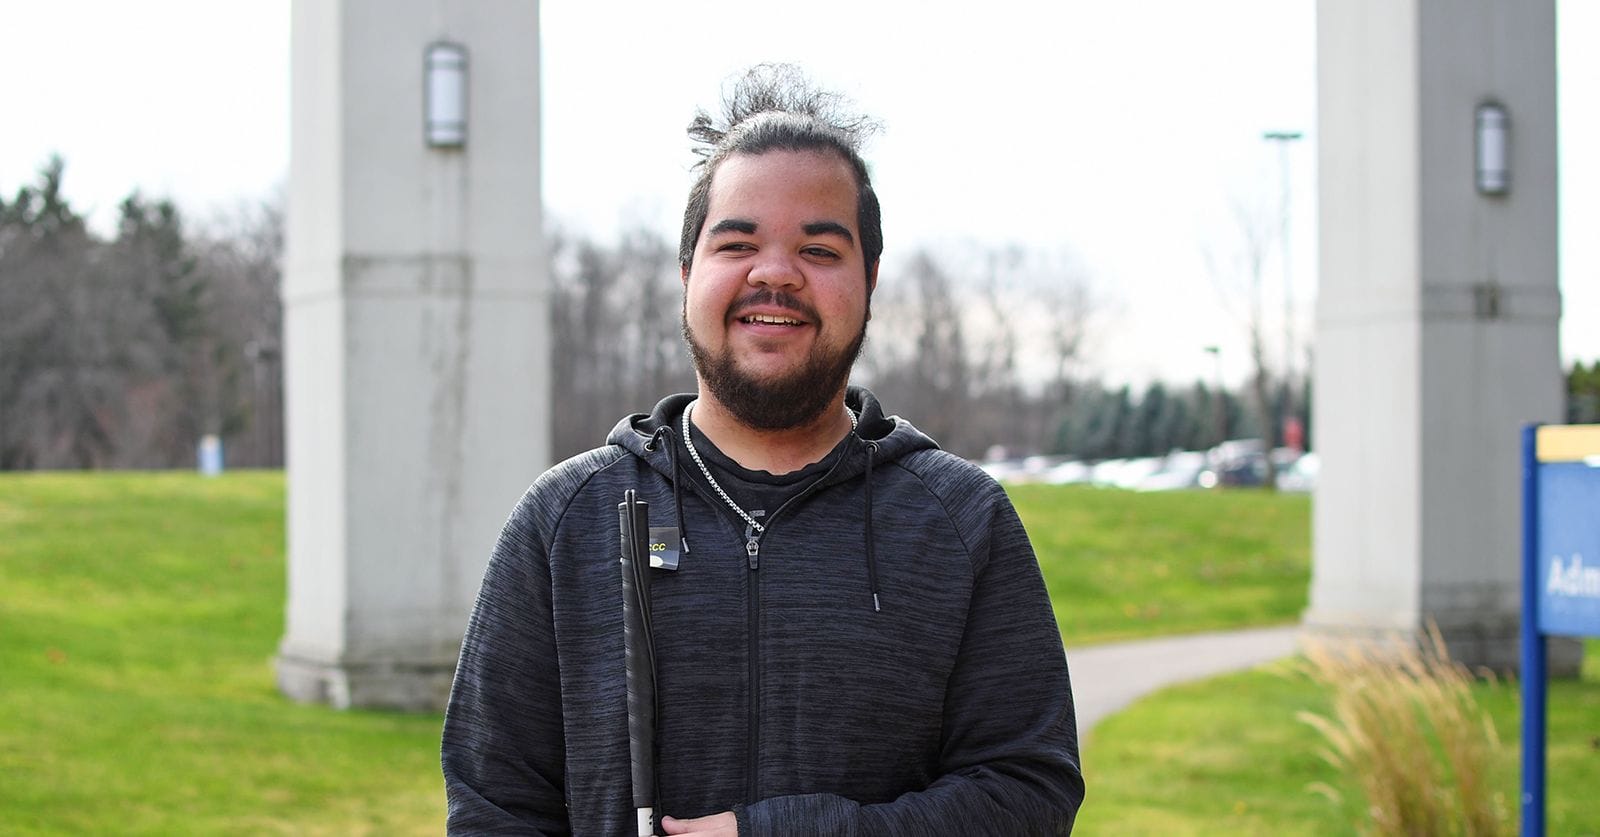 SUNY Niagara student advocates for accessibility at SUNY campuses